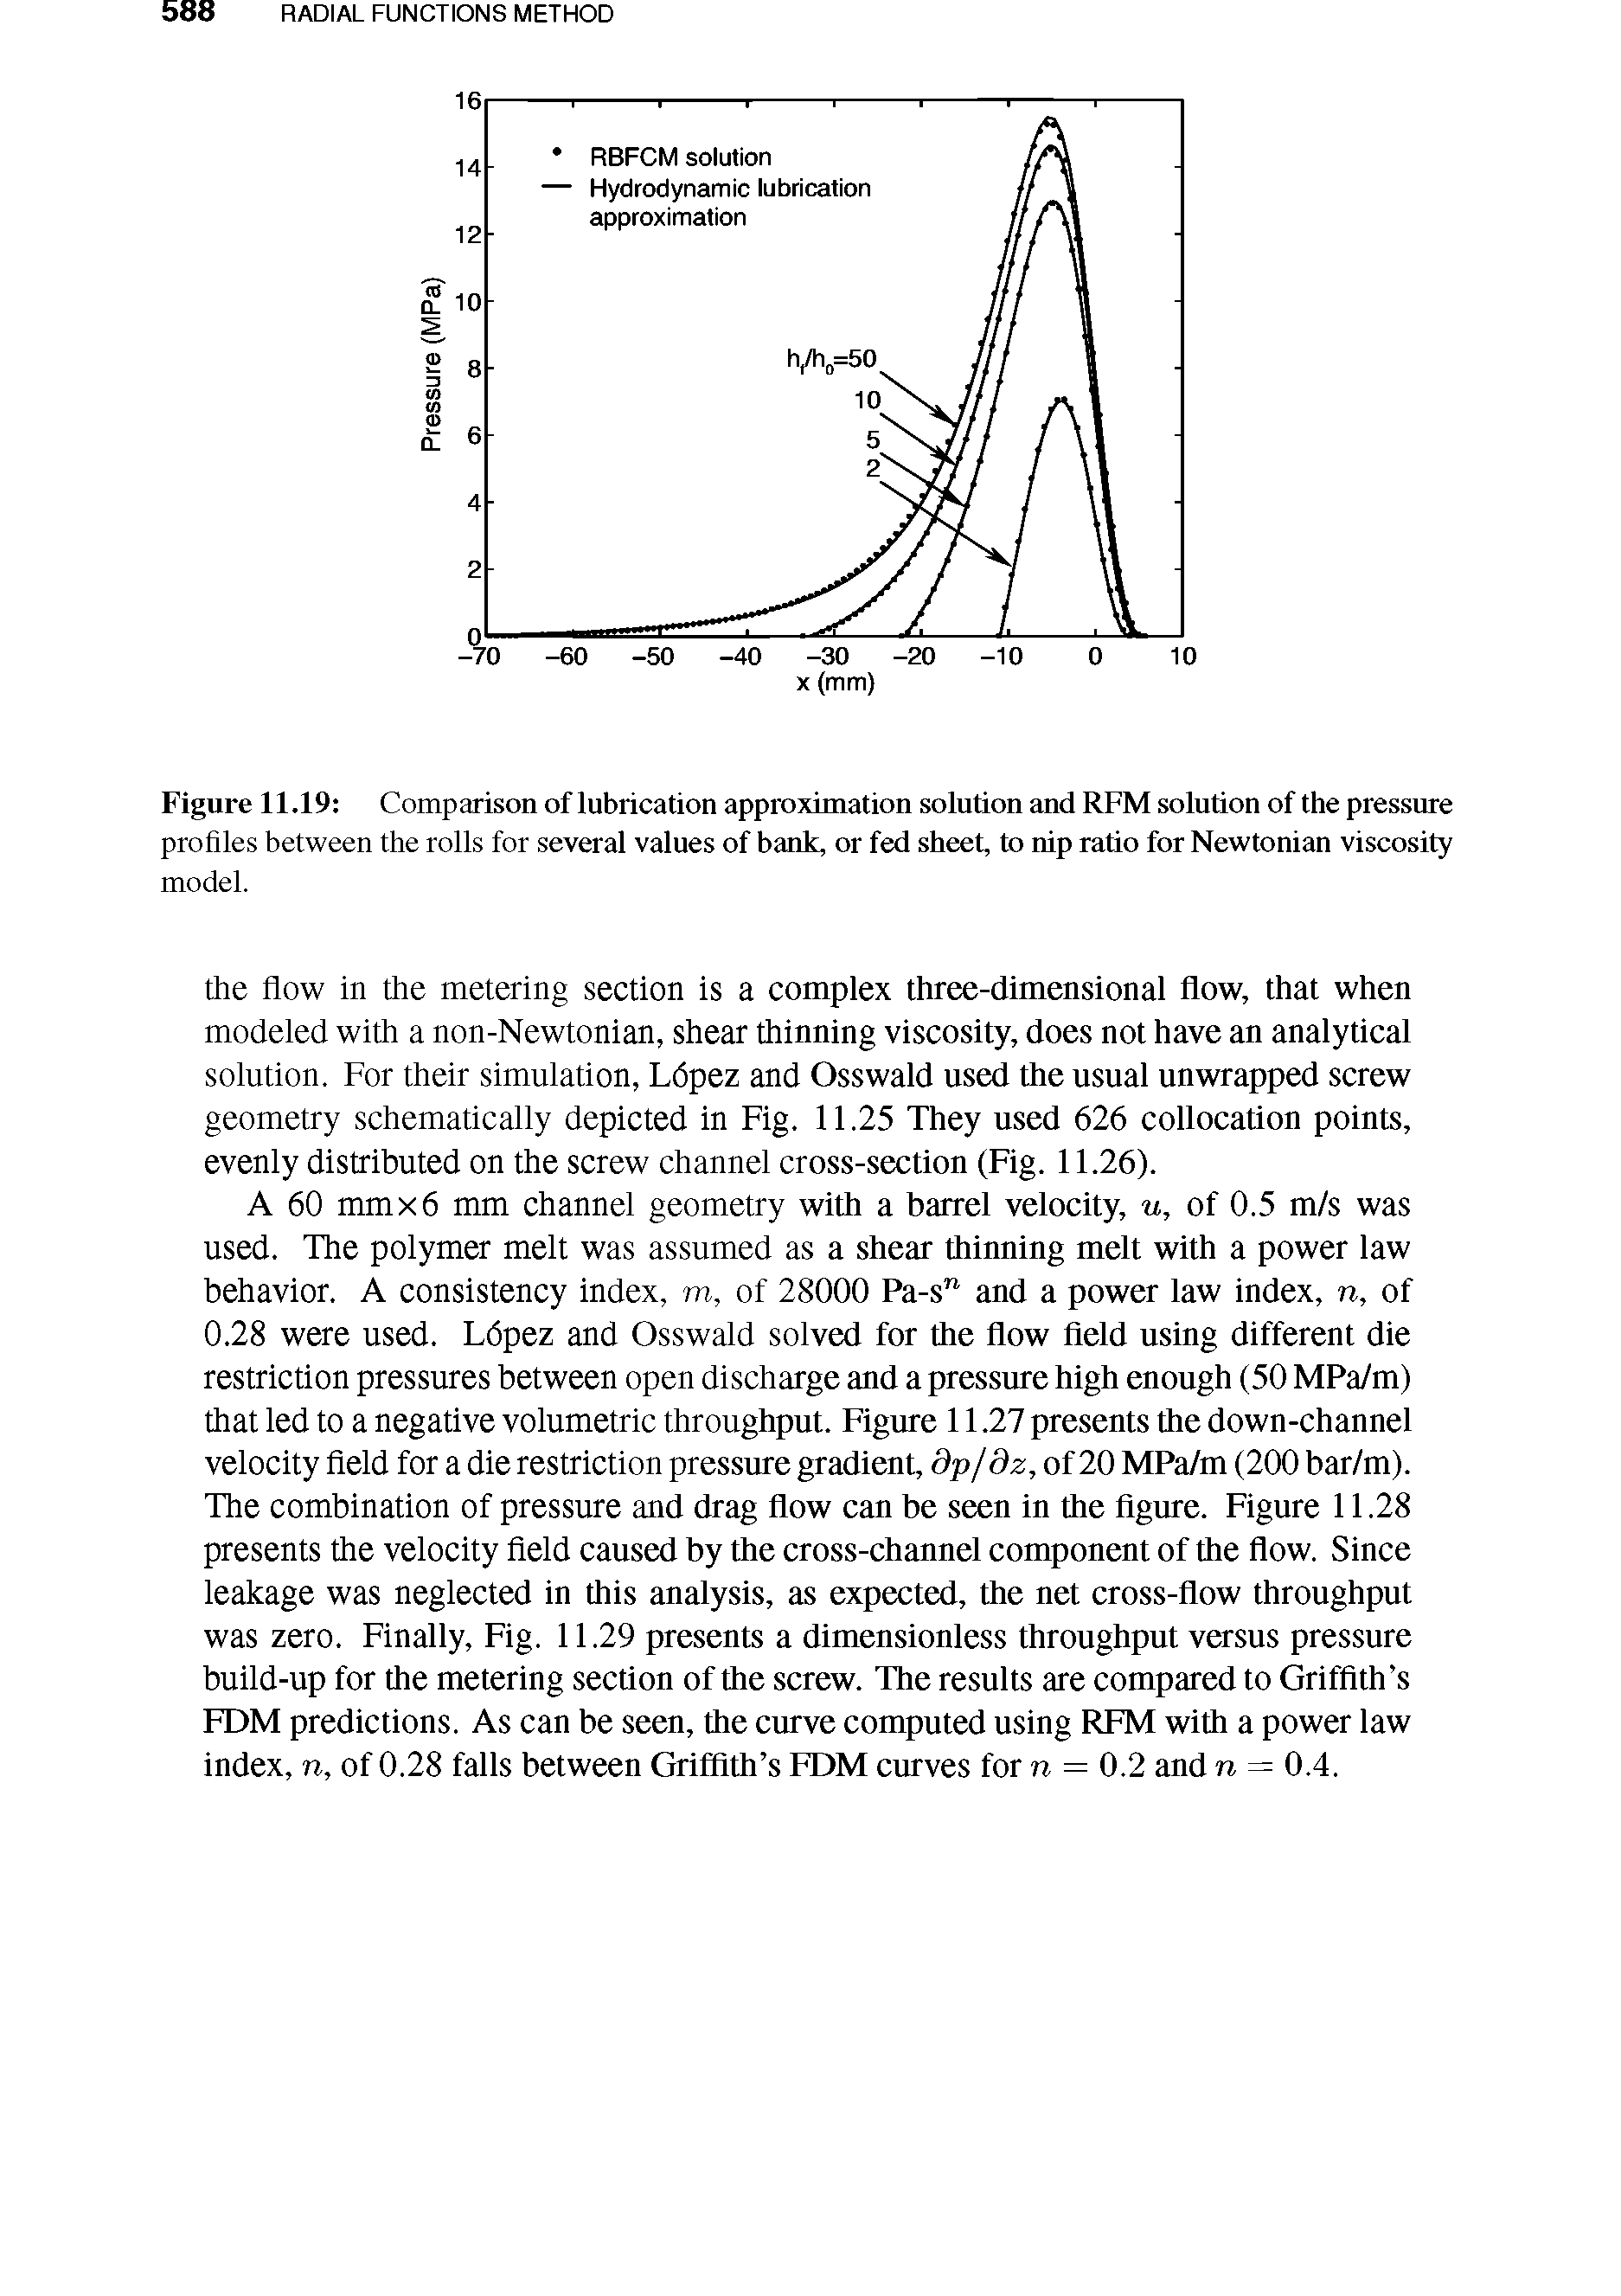 Figure 11.19 Comparison of lubrication approximation solution and RFM solution of the pressure profiles between the rolls for several values of bank, or fed sheet, to nip ratio for Newtonian viscosity model.